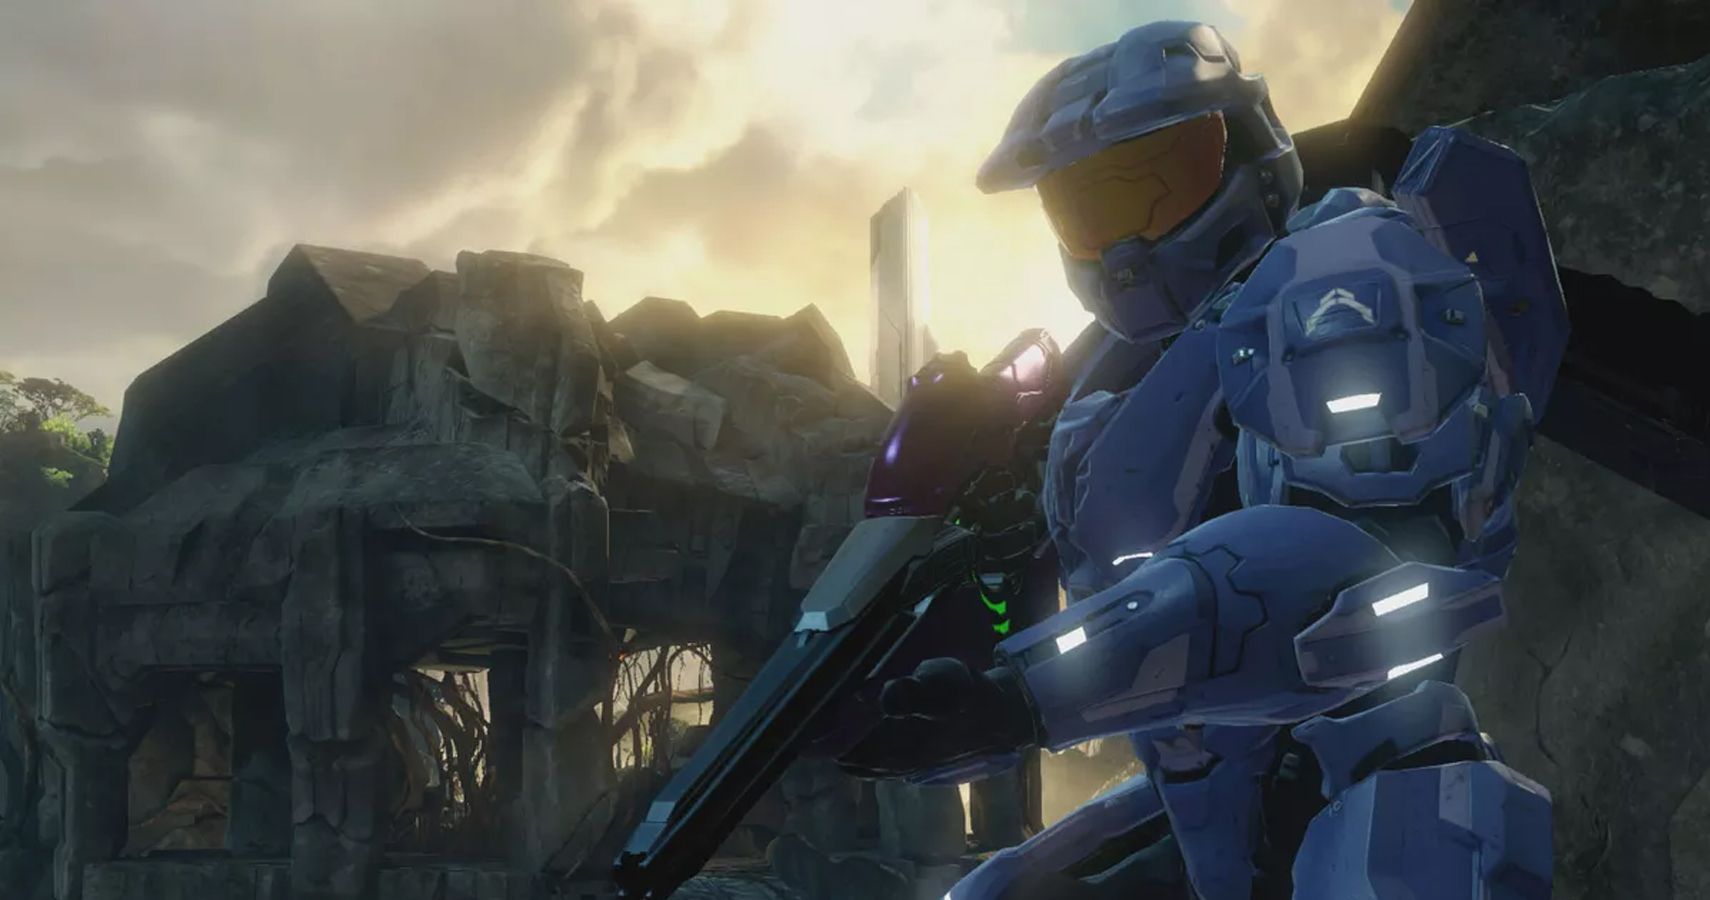 Halo 3 on PC delivers The Master Chief Collection's best port yet